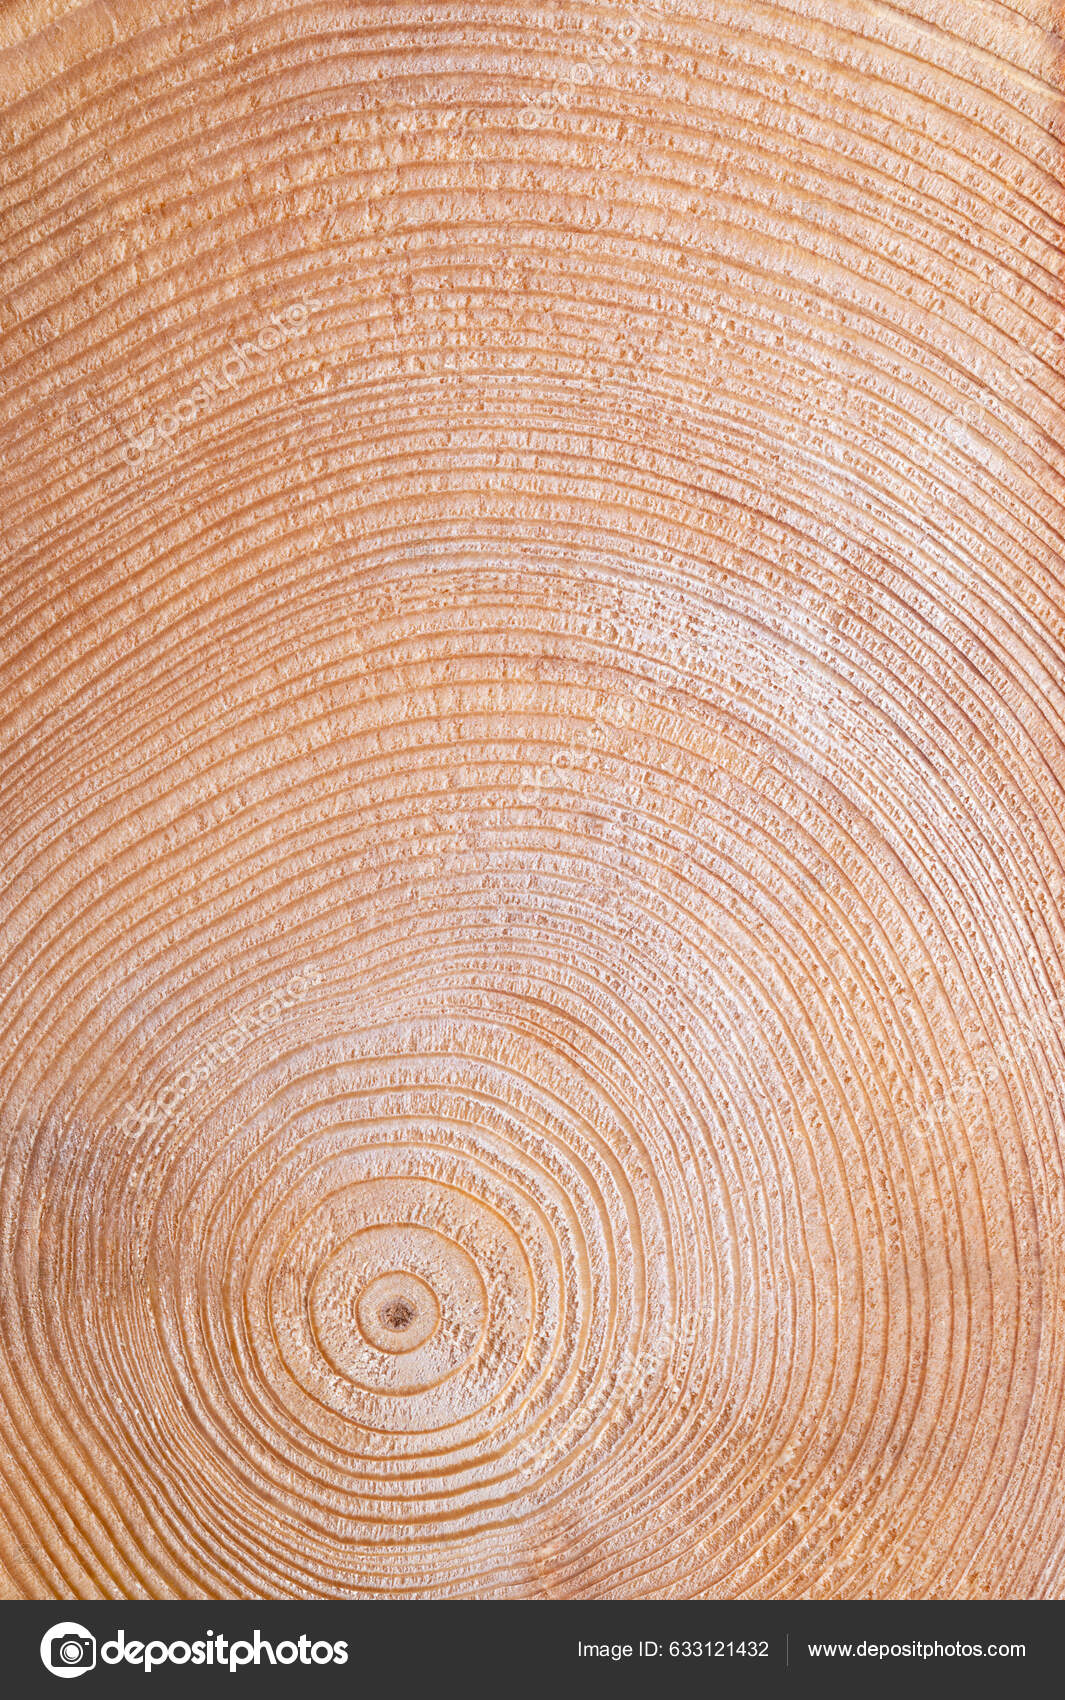 Solved] LAB 8: TREE RINGS Name: [100 points] Section: PART 1 -  INTERPRETING... | Course Hero